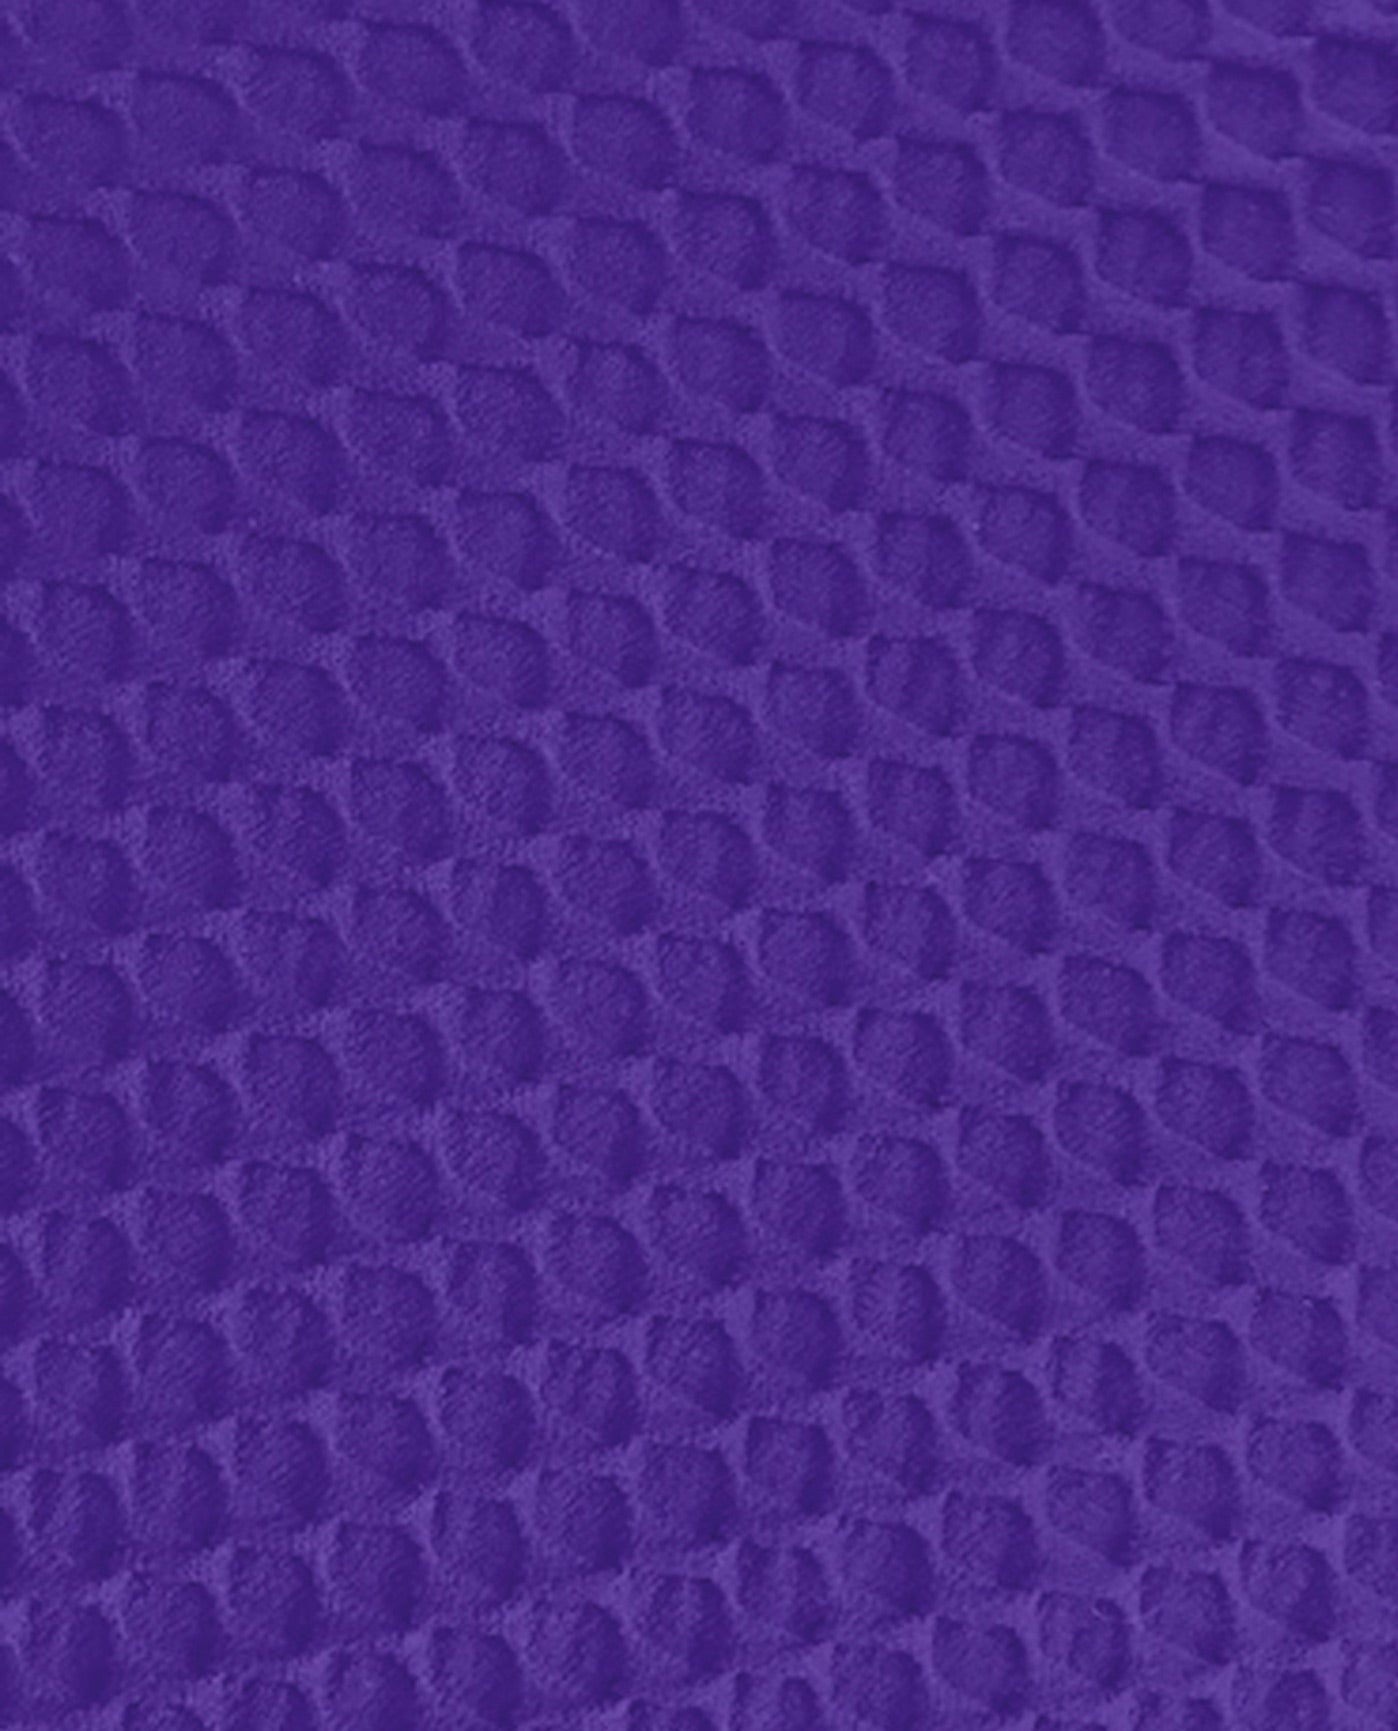 FABRIC SWATCH VIEW OF CHLORINE RESISTANT AQUAMORE COLOR BLOCK TEXTURED TWIST FRONT ONE PIECE SWIMSUIT | 618L AQT TEXTURED PURPLE